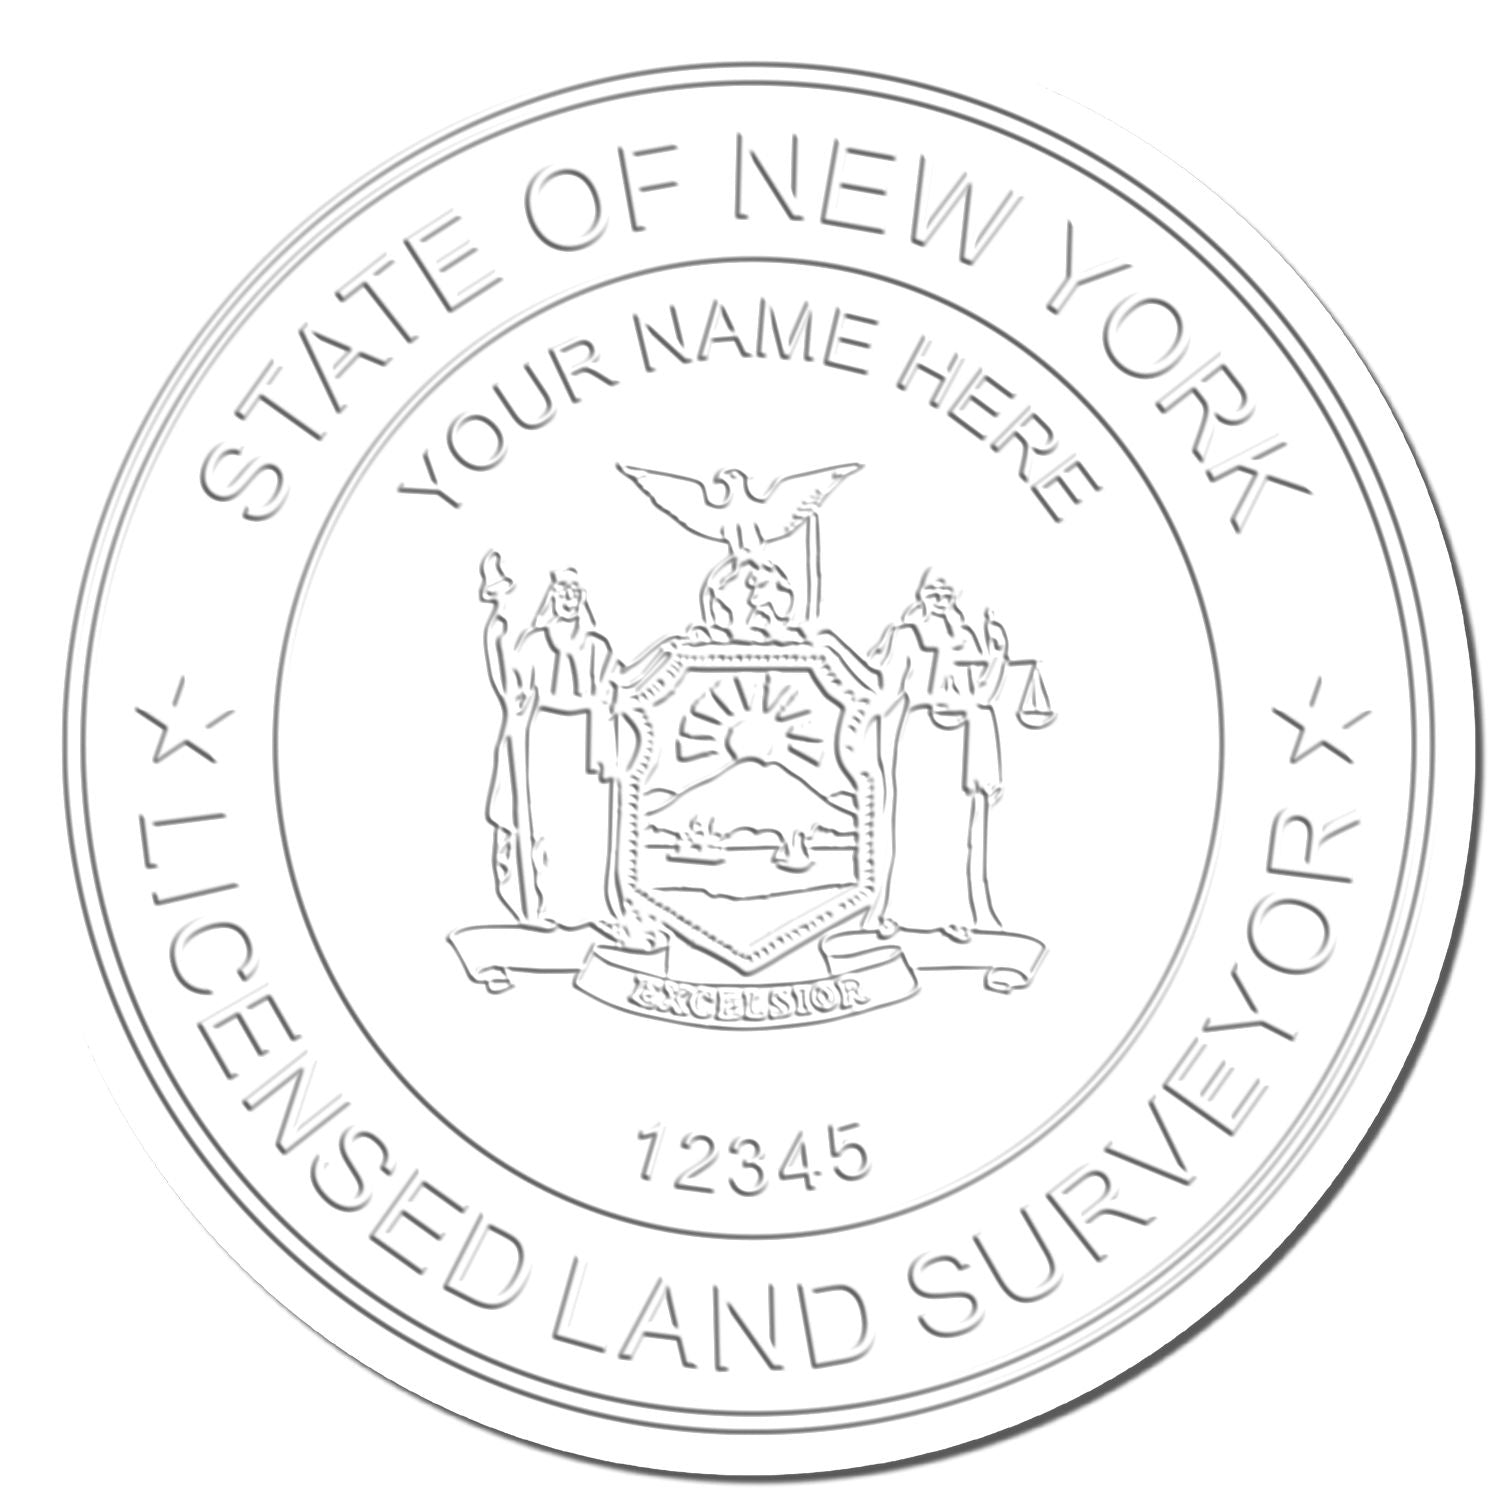 This paper is stamped with a sample imprint of the Extended Long Reach New York Surveyor Embosser, signifying its quality and reliability.